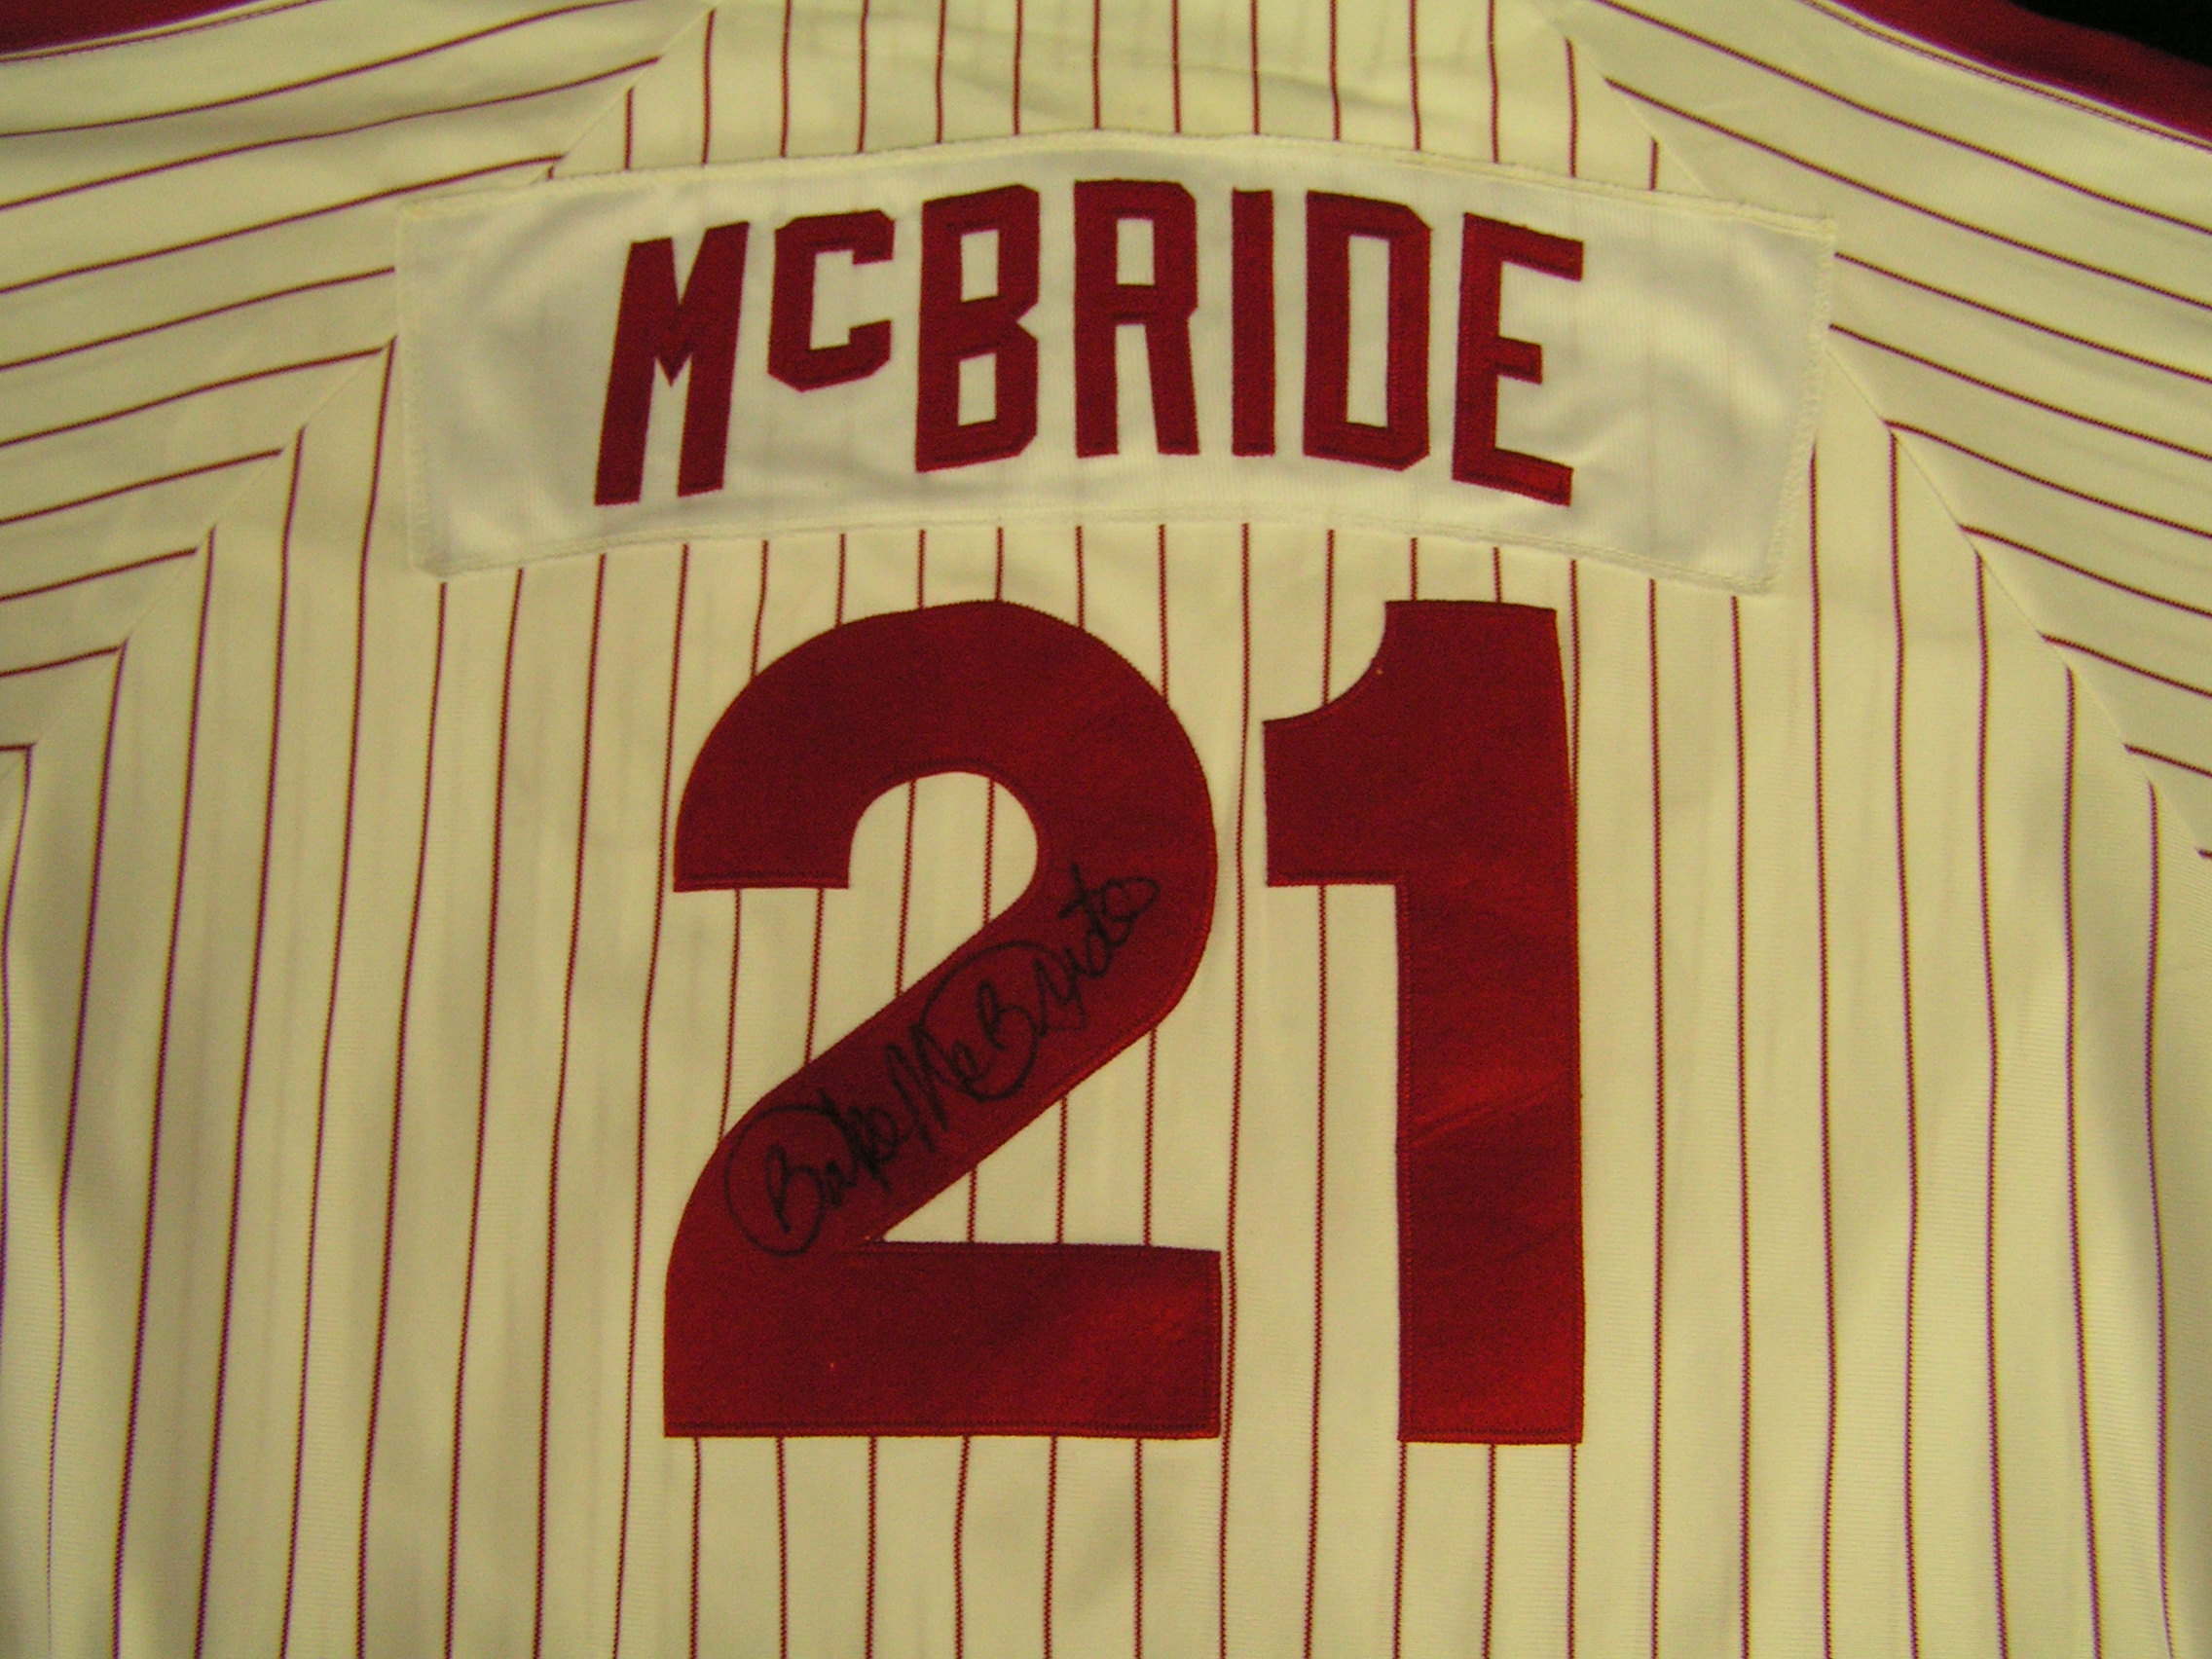 Philadelphia Phillies Bake McBride Autographed Jersey - Carls Cards &  Collectibles